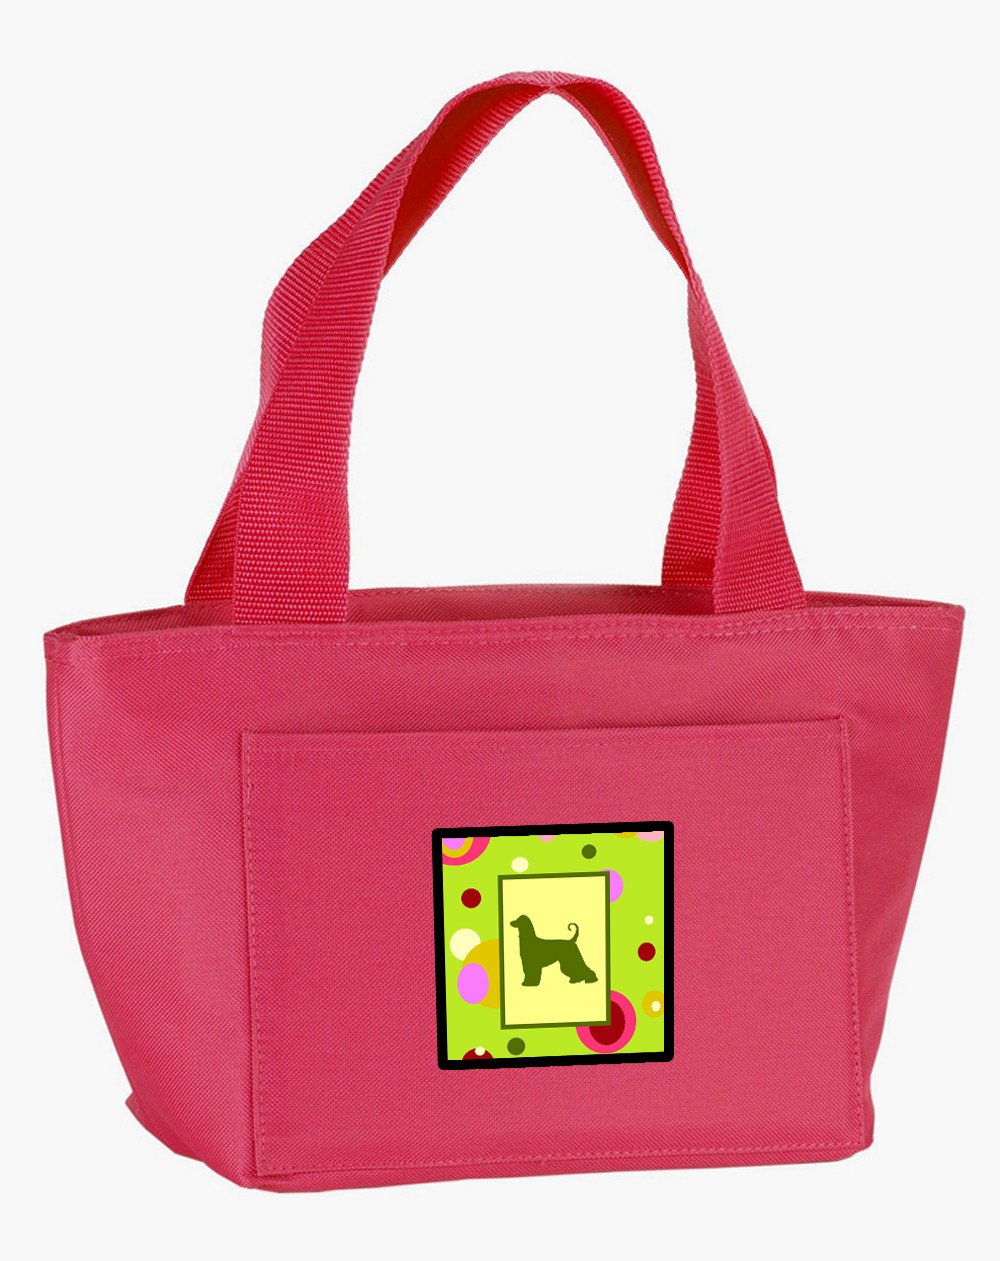 Lime Green Dots Afghan Hound Lunch Bag CK1002PK-8808 by Caroline's Treasures